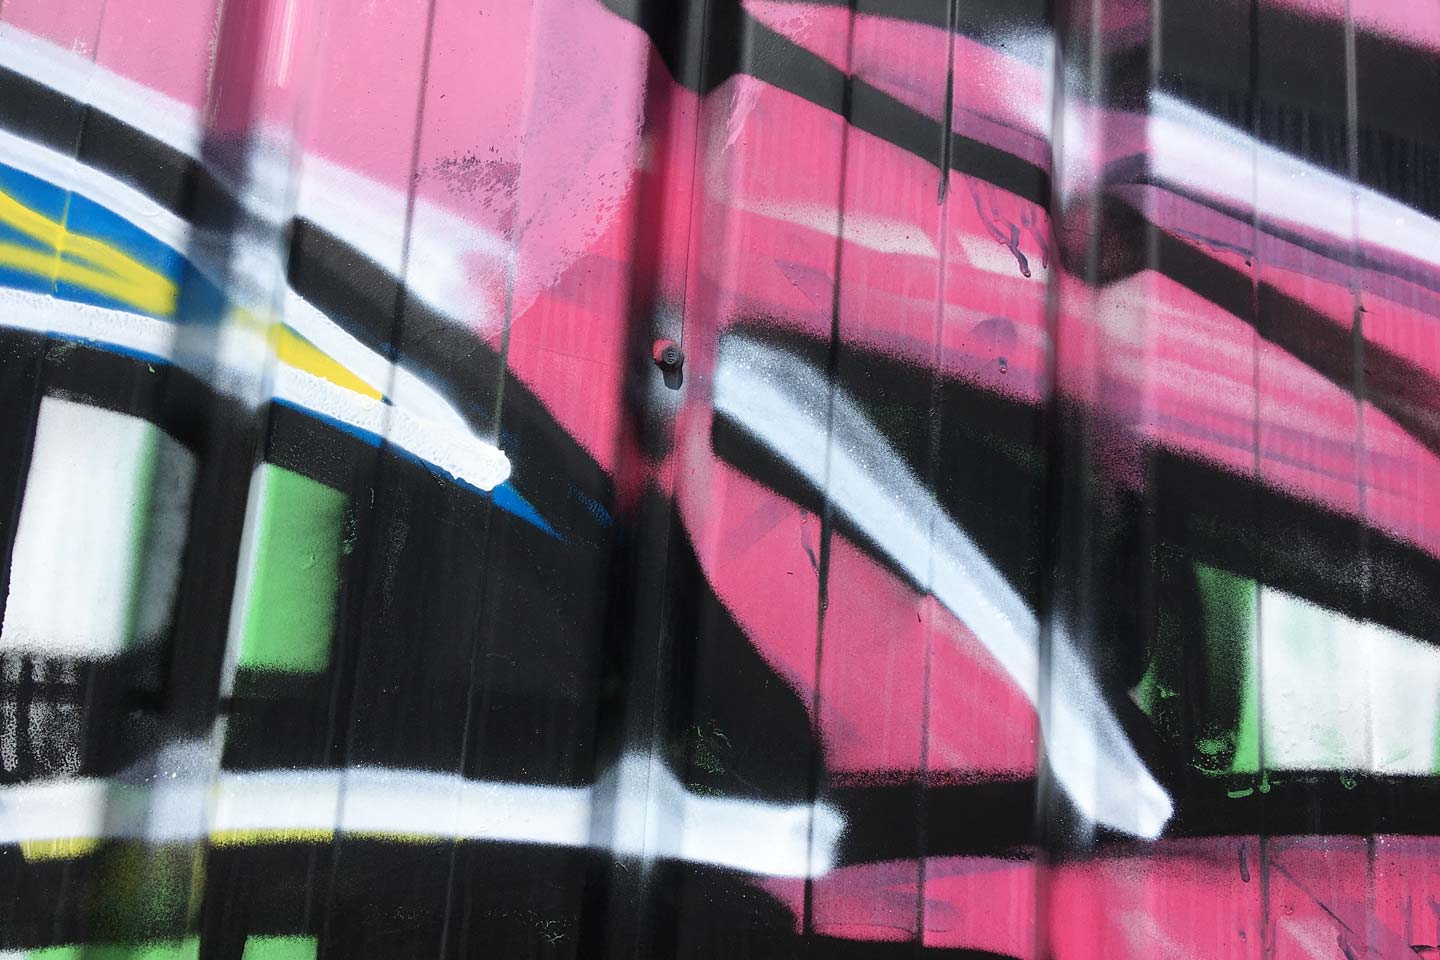 Olhao Street Art - pink, green, black and white shapes